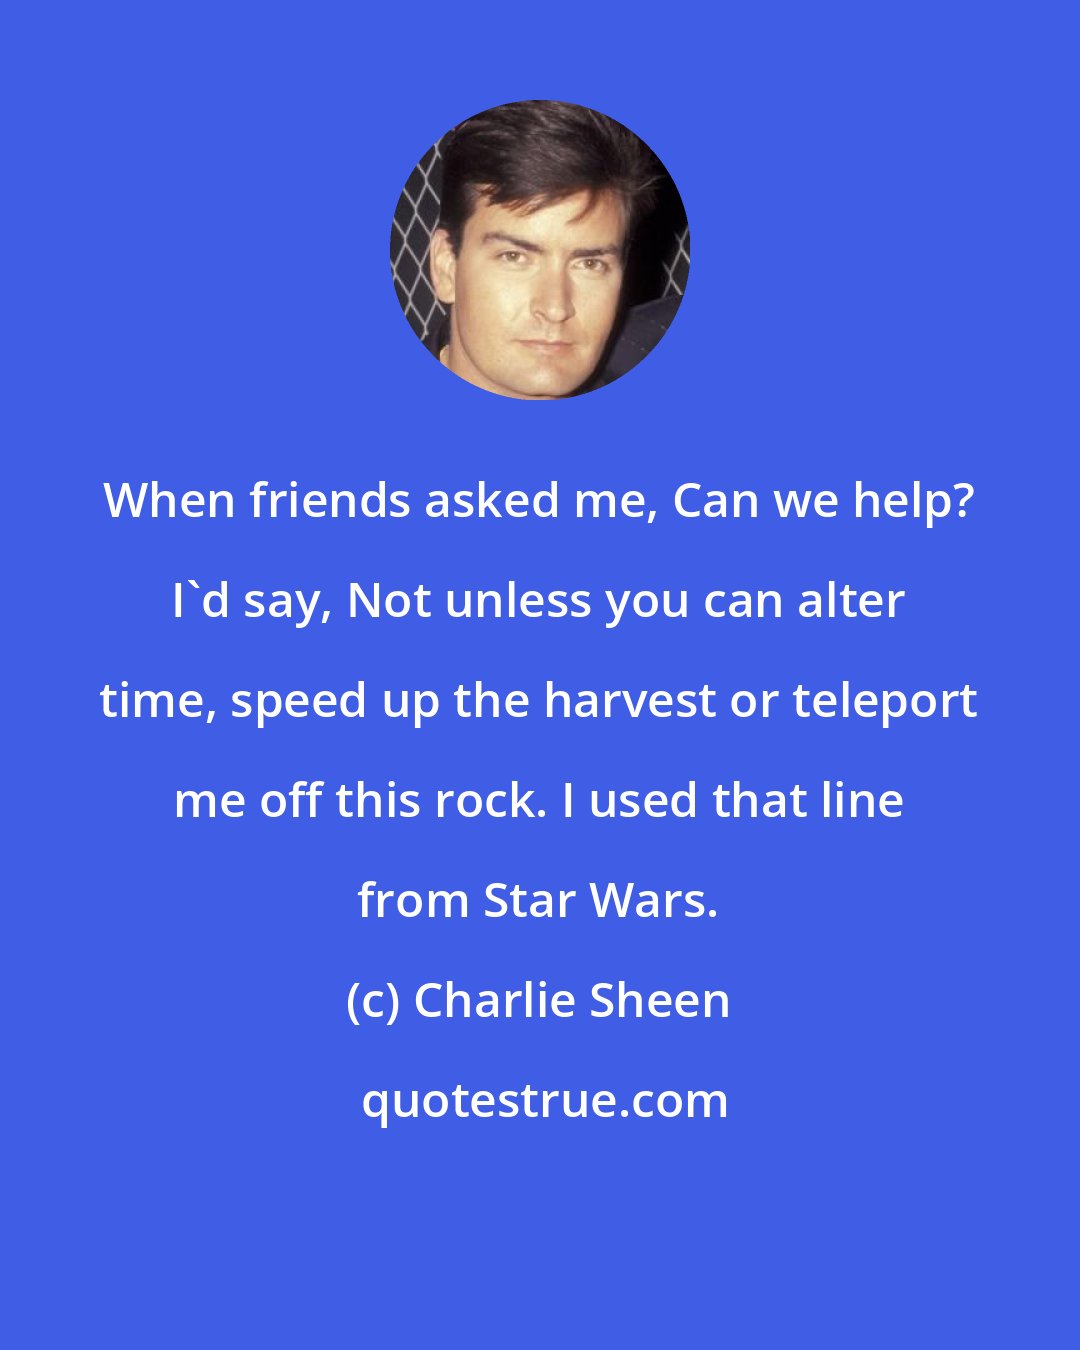 Charlie Sheen: When friends asked me, Can we help? I'd say, Not unless you can alter time, speed up the harvest or teleport me off this rock. I used that line from Star Wars.